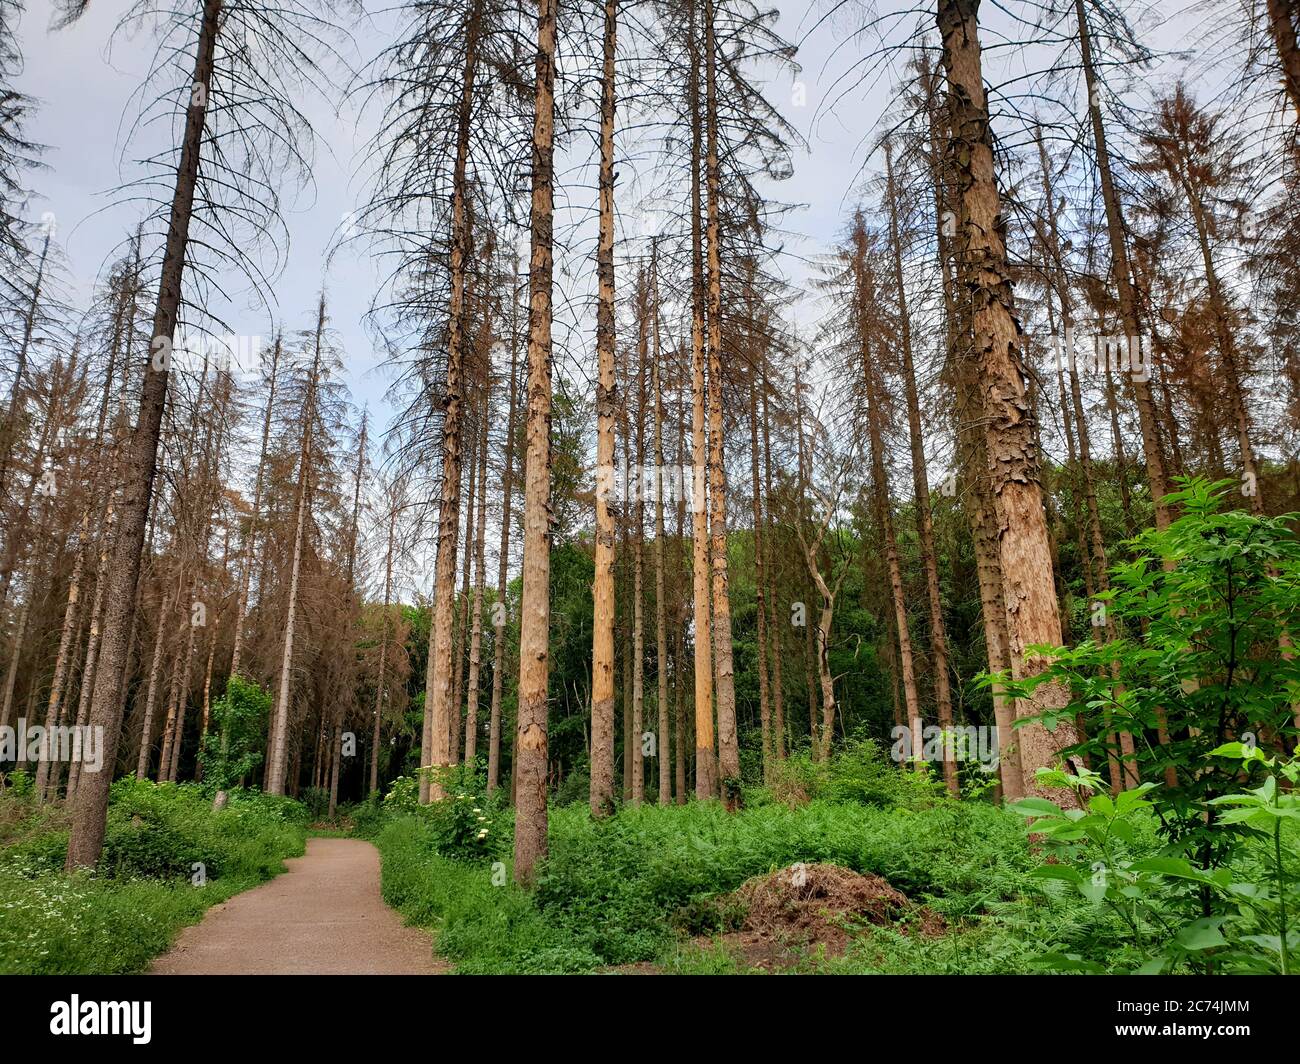 Norway spruce (Picea abies), dead spruce forest caused by dryness and bark beetle, Germany, North Rhine-Westphalia Stock Photo